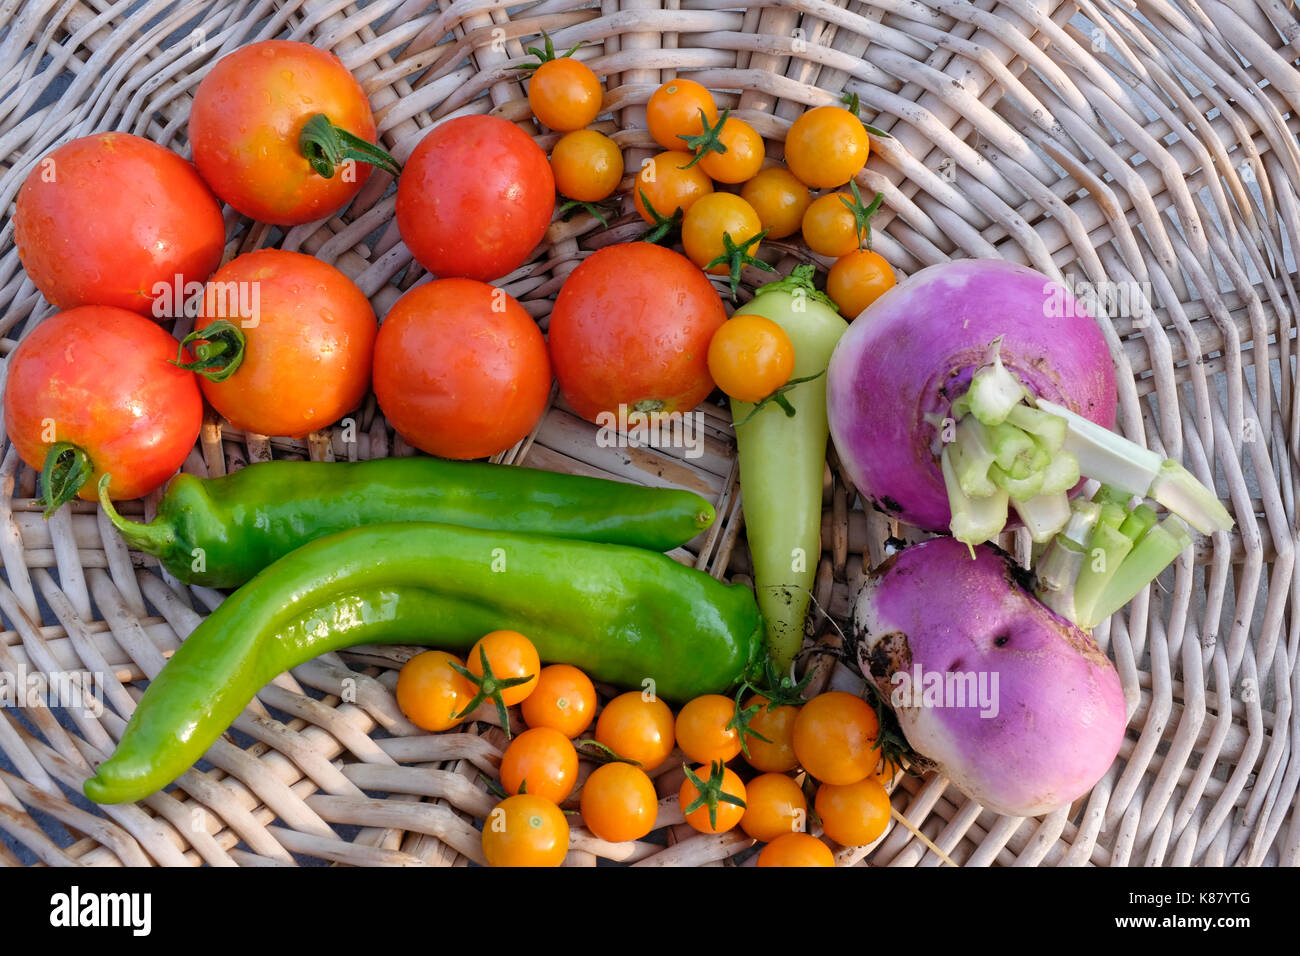 Turnips, sungold and early girl tomatoes, and gree peppers fresh from an organic garden, in a basket. Stock Photo